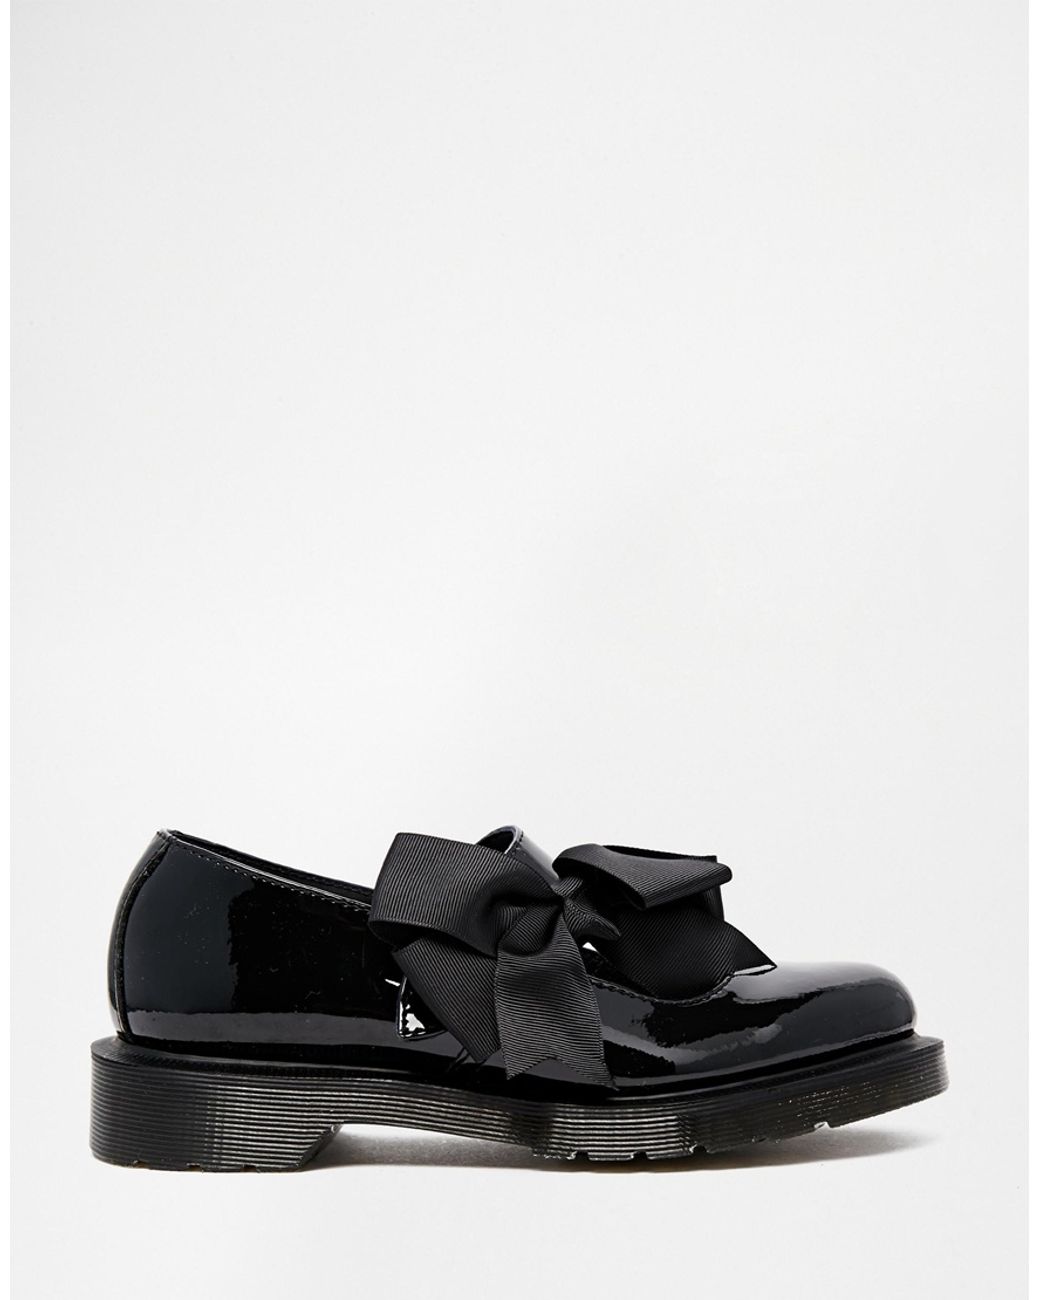 Dr. Martens Mariel Bow Mary Jane Patent Flat Shoes in Black | Lyst